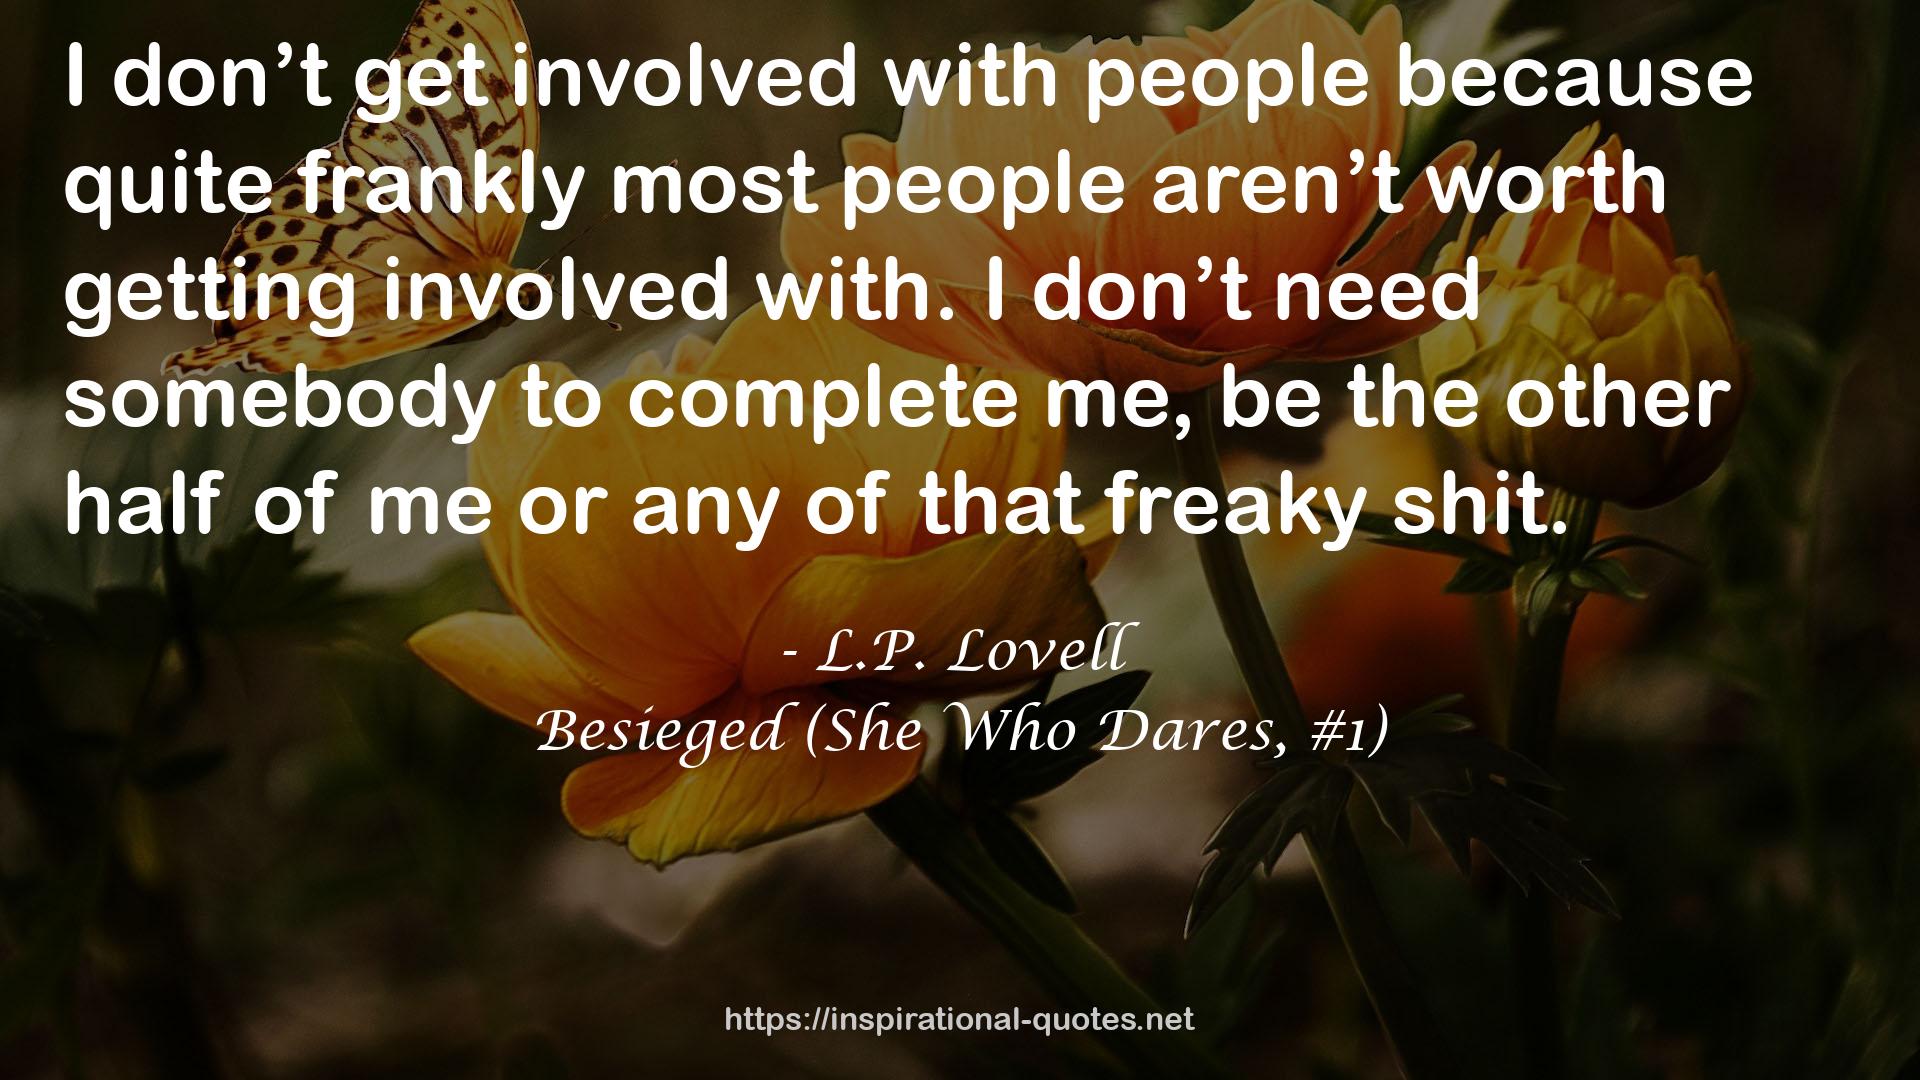 Besieged (She Who Dares, #1) QUOTES